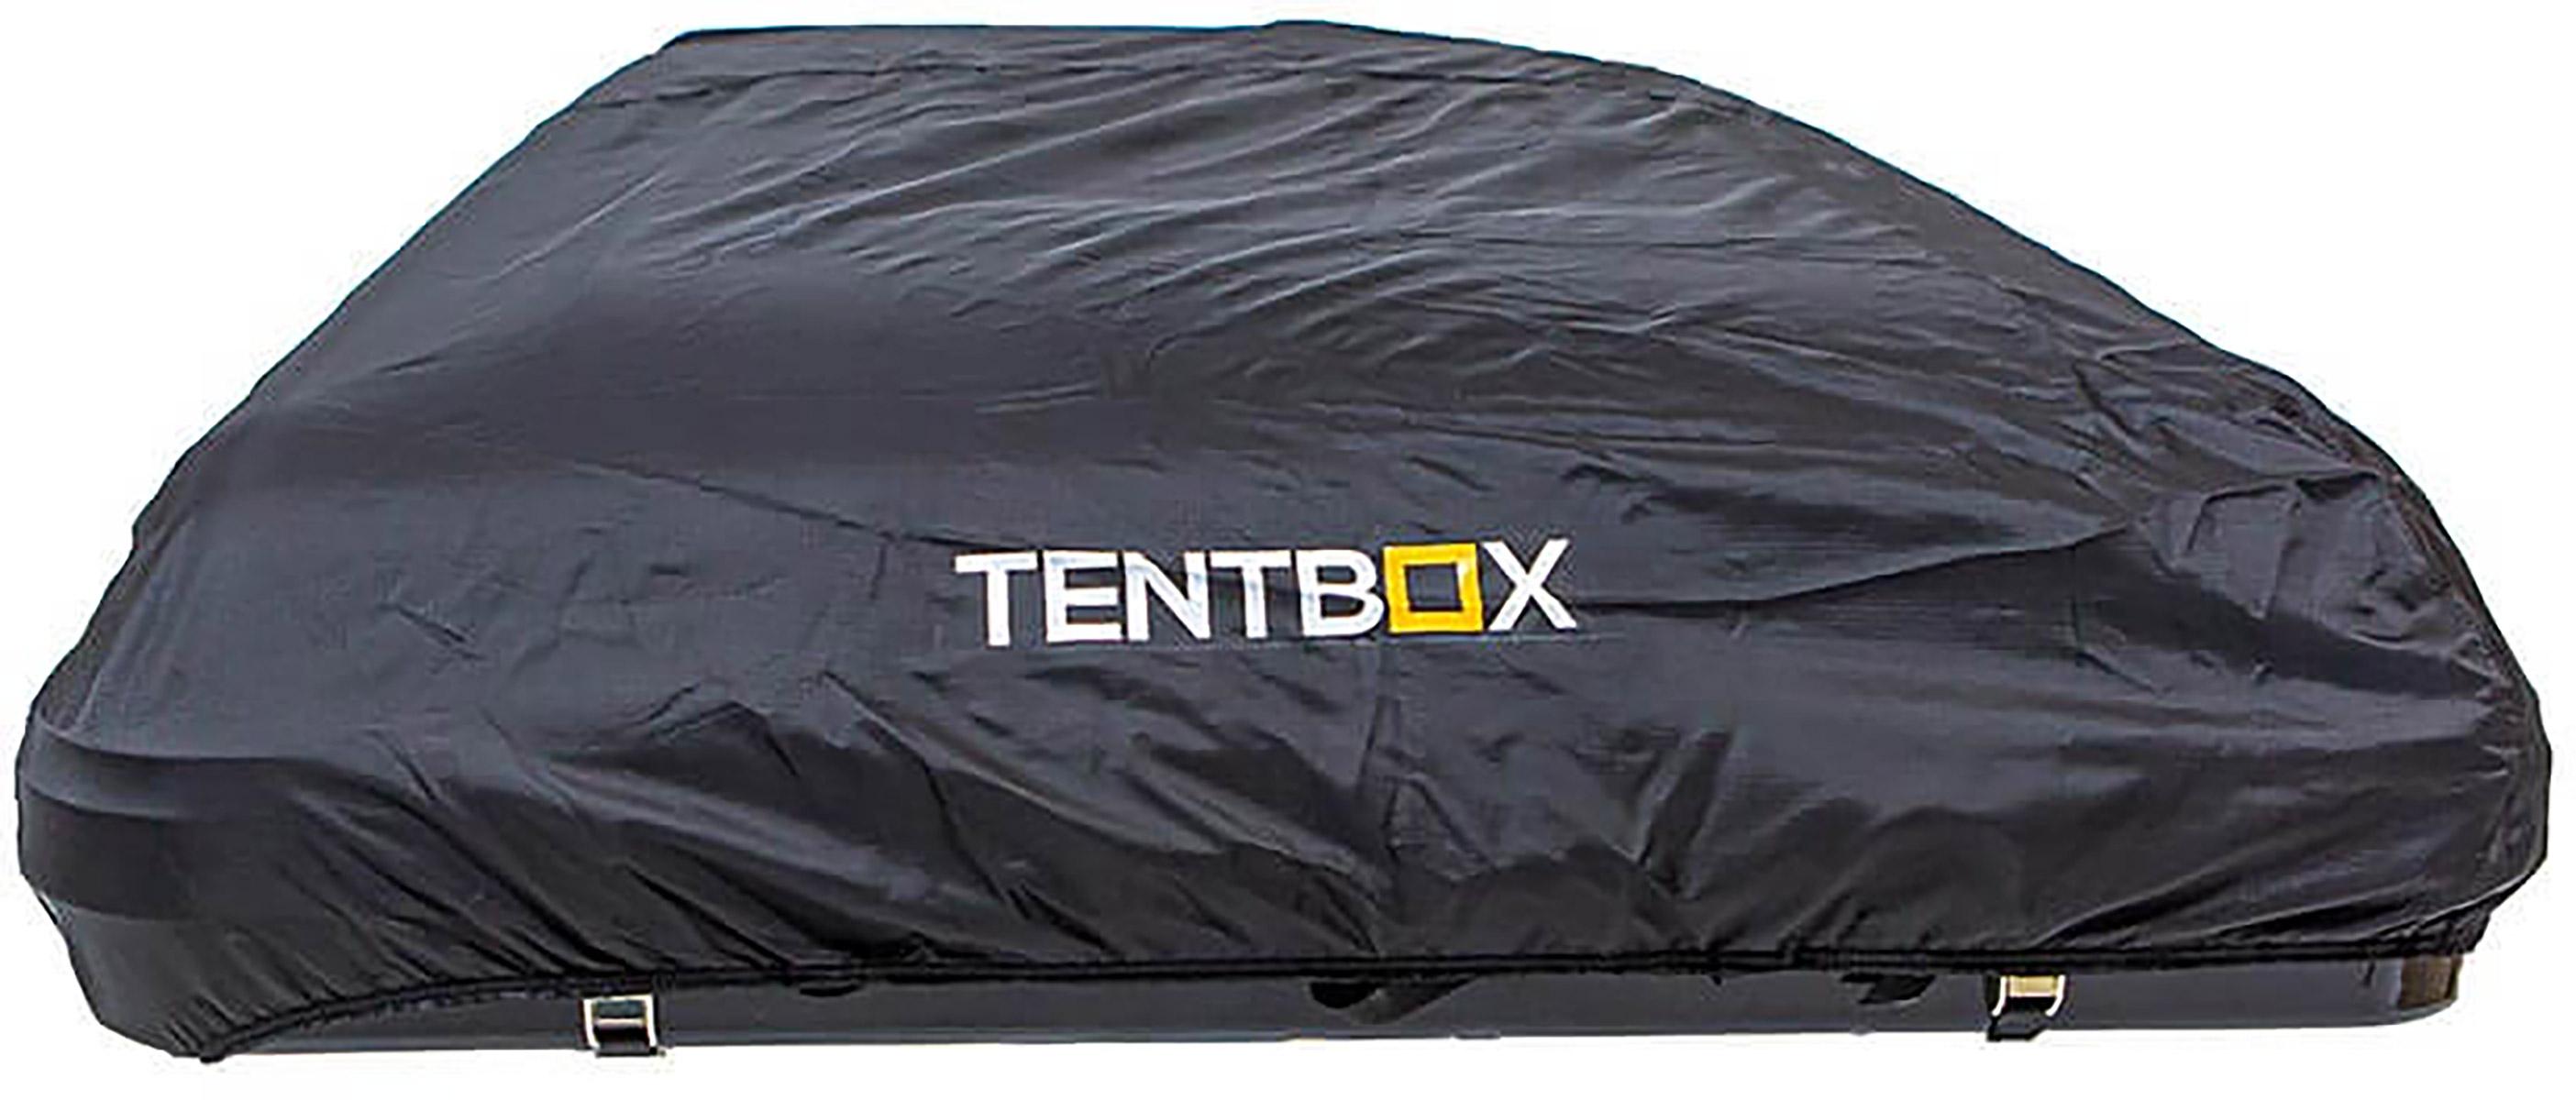 Tentbox Protective Cover (classic) - Black